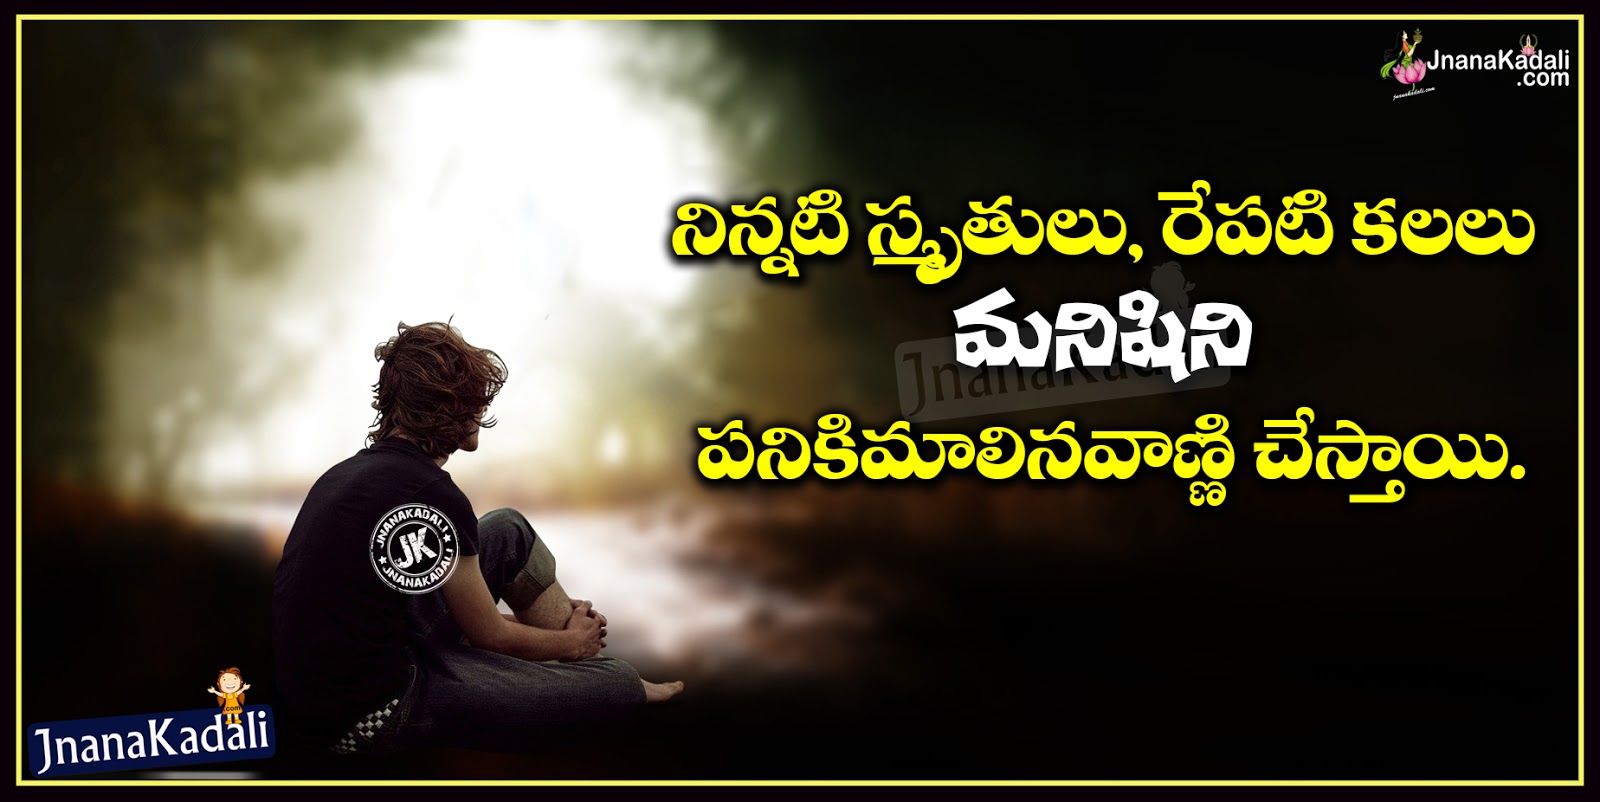 Here is a Nice Telugu Life Lessons Quotations in Telugu Telugu No Money in Pocket Quotations and Sayings Hungry Stomach Quotes in Telugu Telugu Best